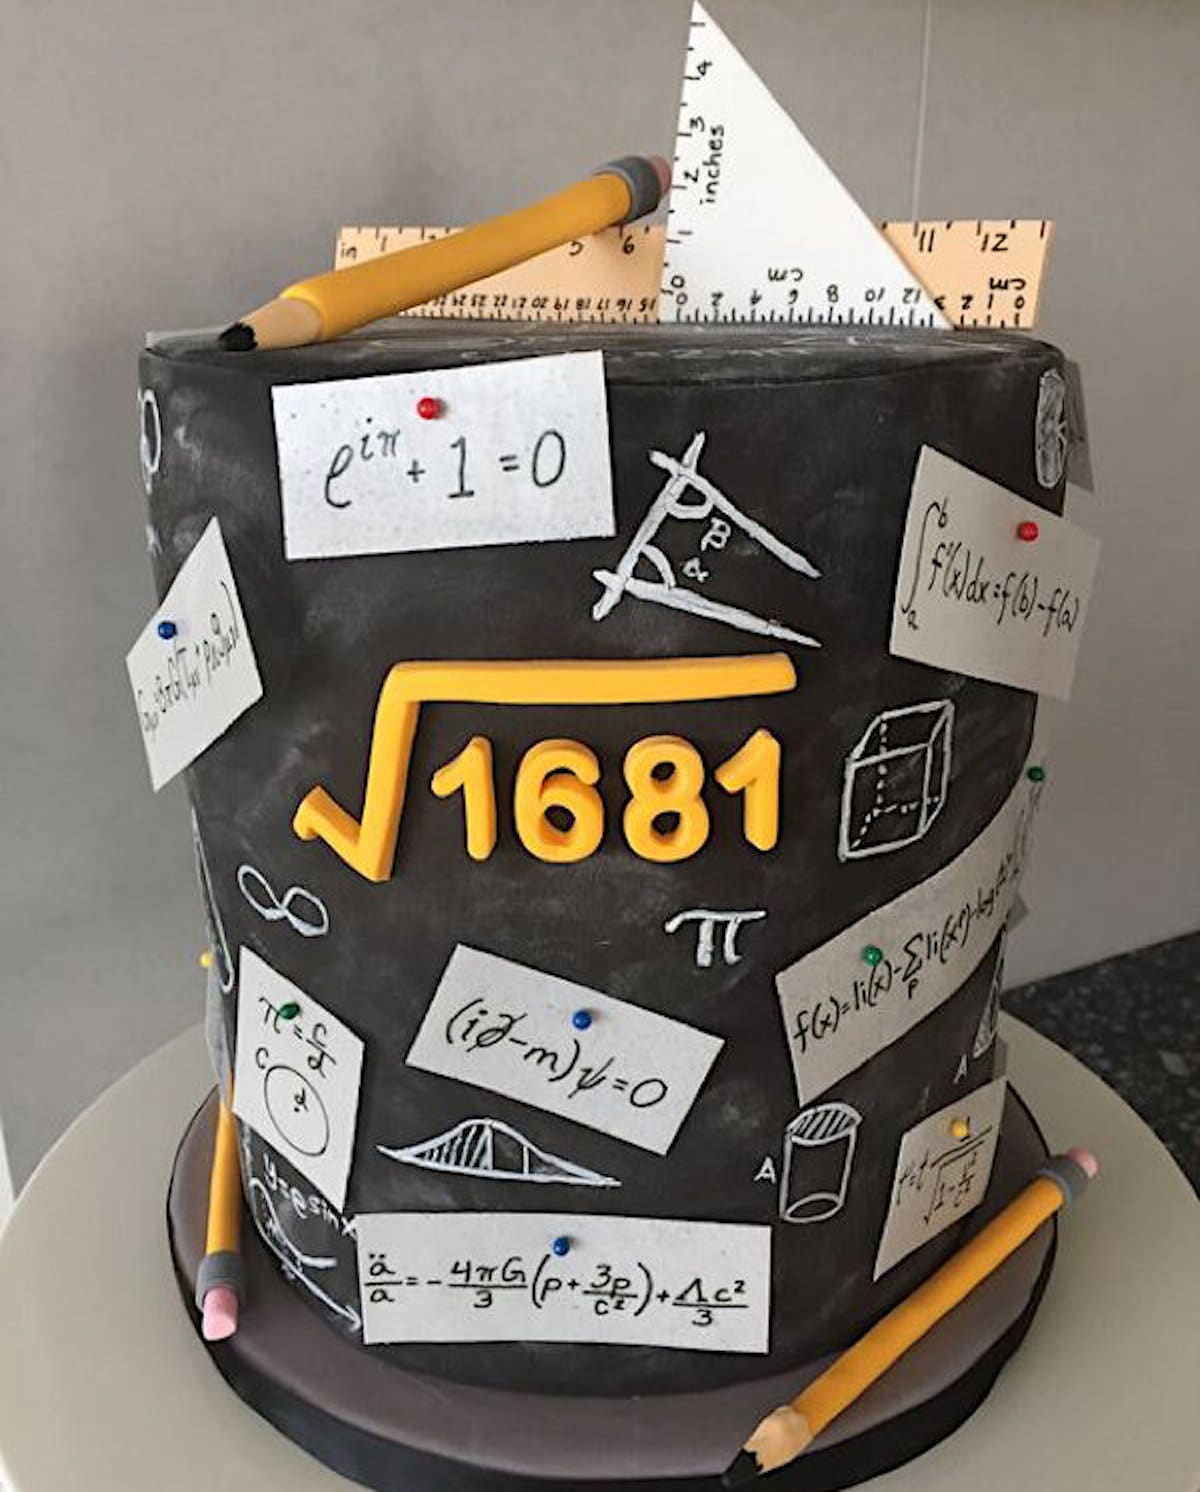 8 Ideas For Graduation Cakes: Celebrate A New Chapter In Style